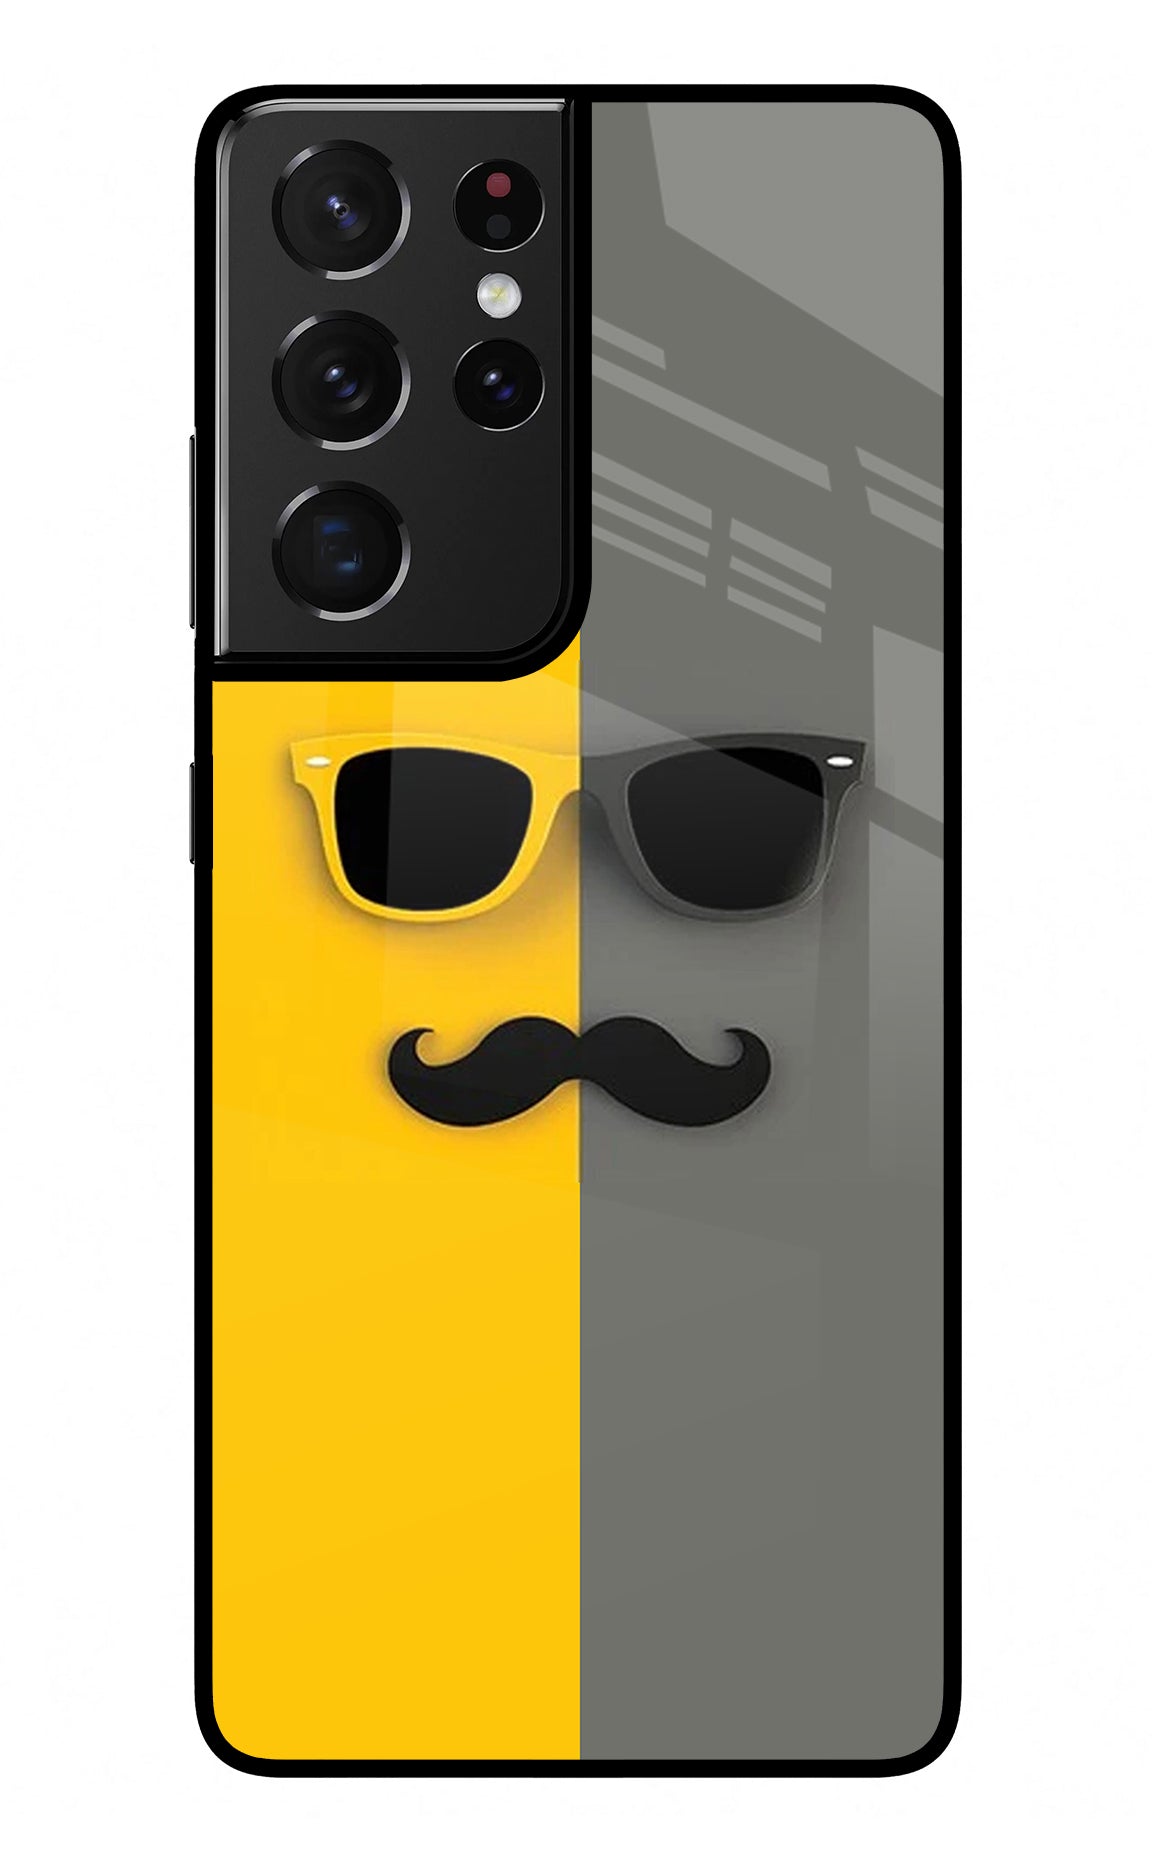 Sunglasses with Mustache Samsung S21 Ultra Back Cover